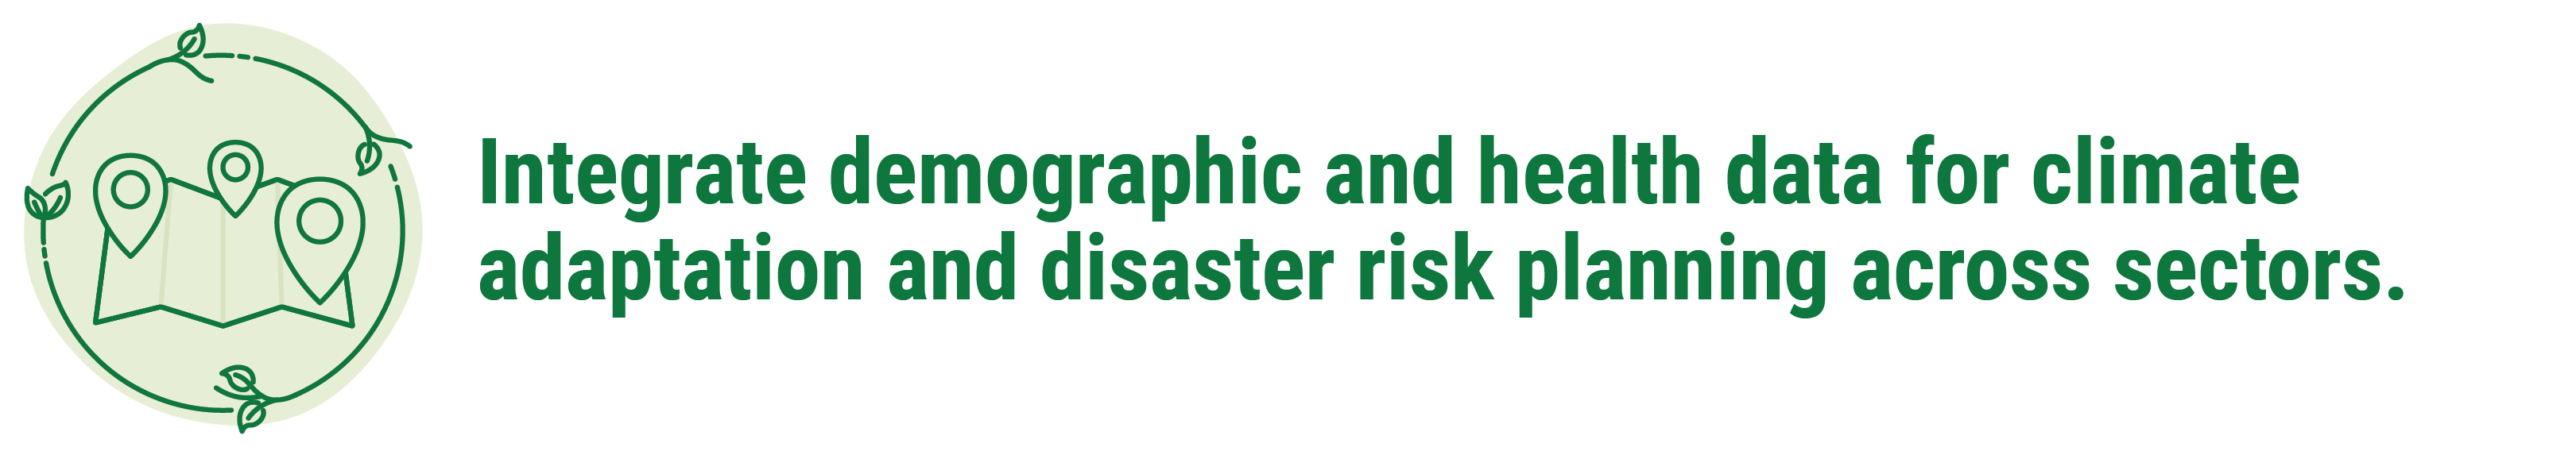 Integrate demographic and health data for climate adaptation and disaster risk planning across sectors.